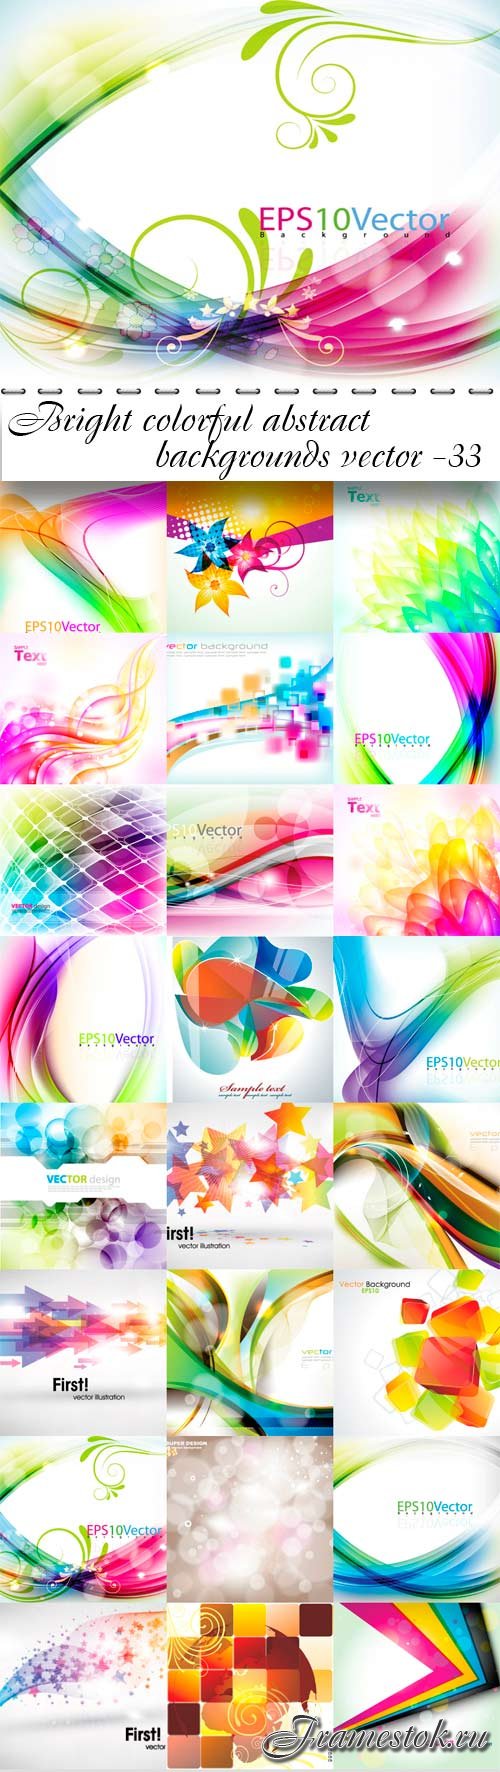 Bright colorful abstract backgrounds vector -33